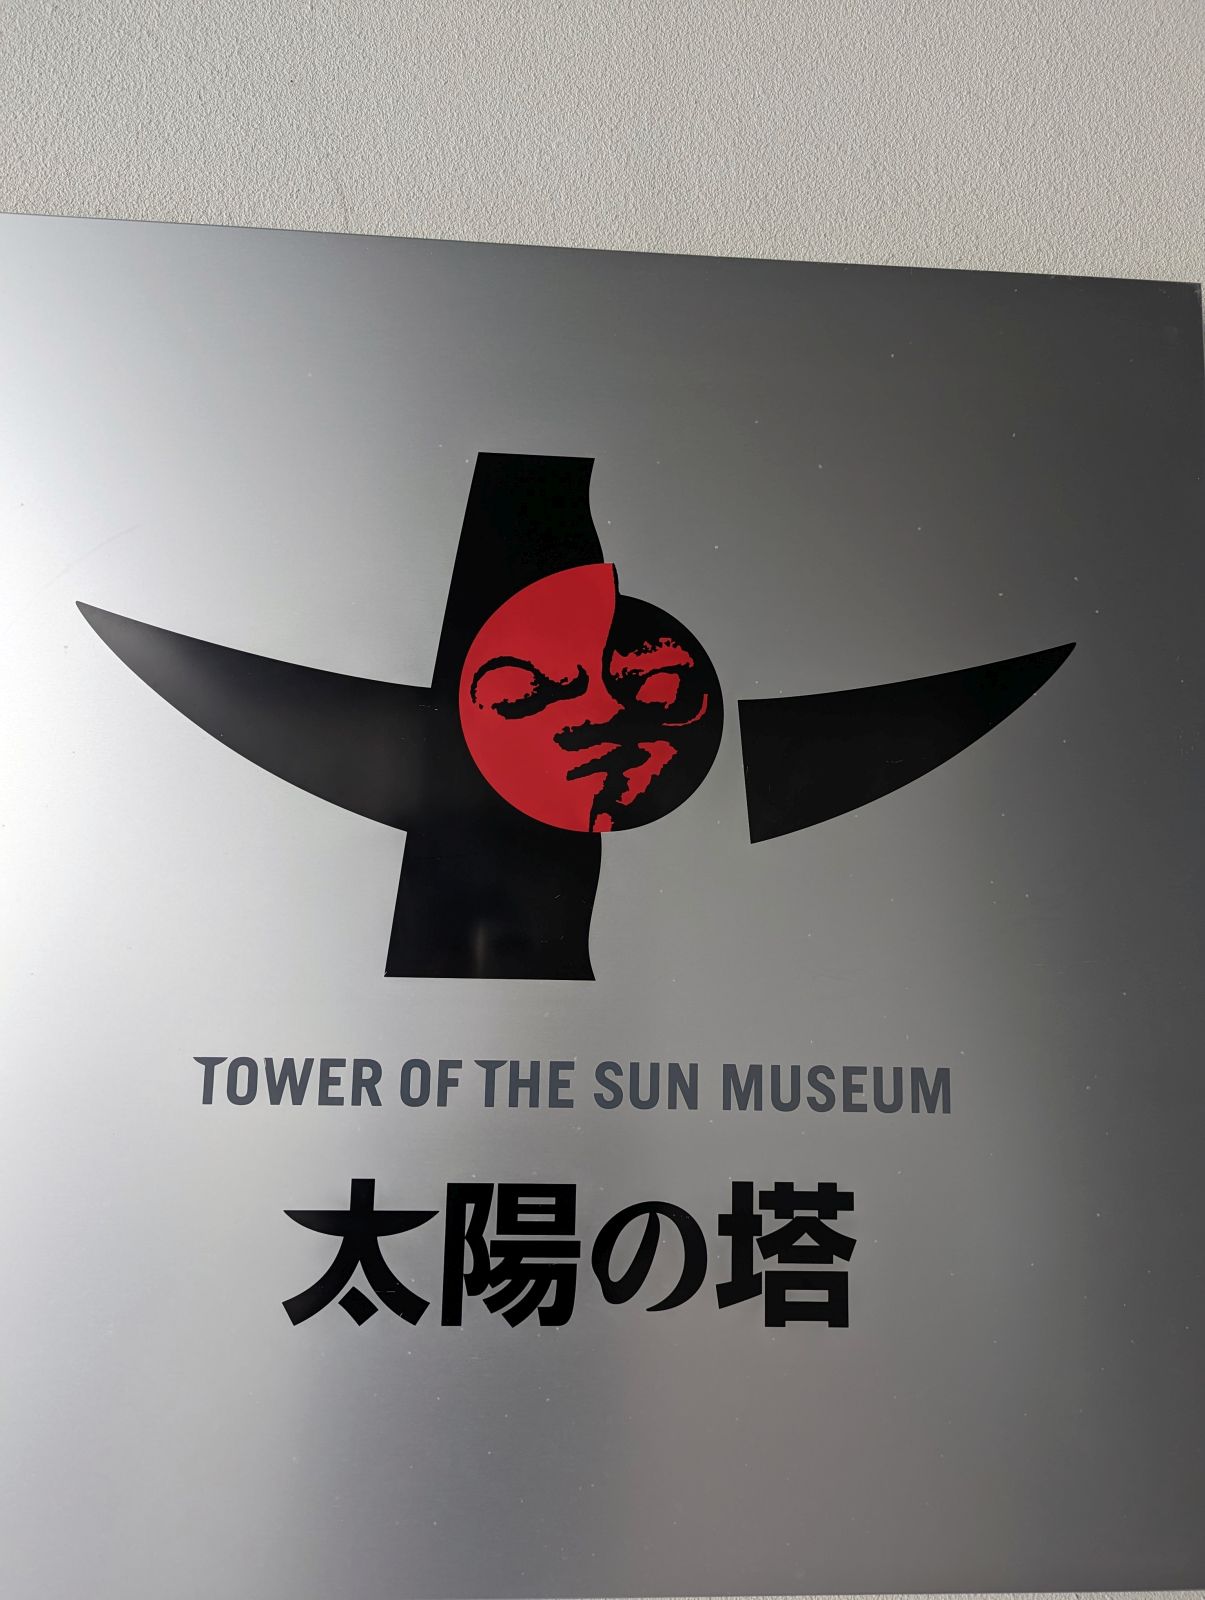 TOWER OF THE SUN MUSEUM